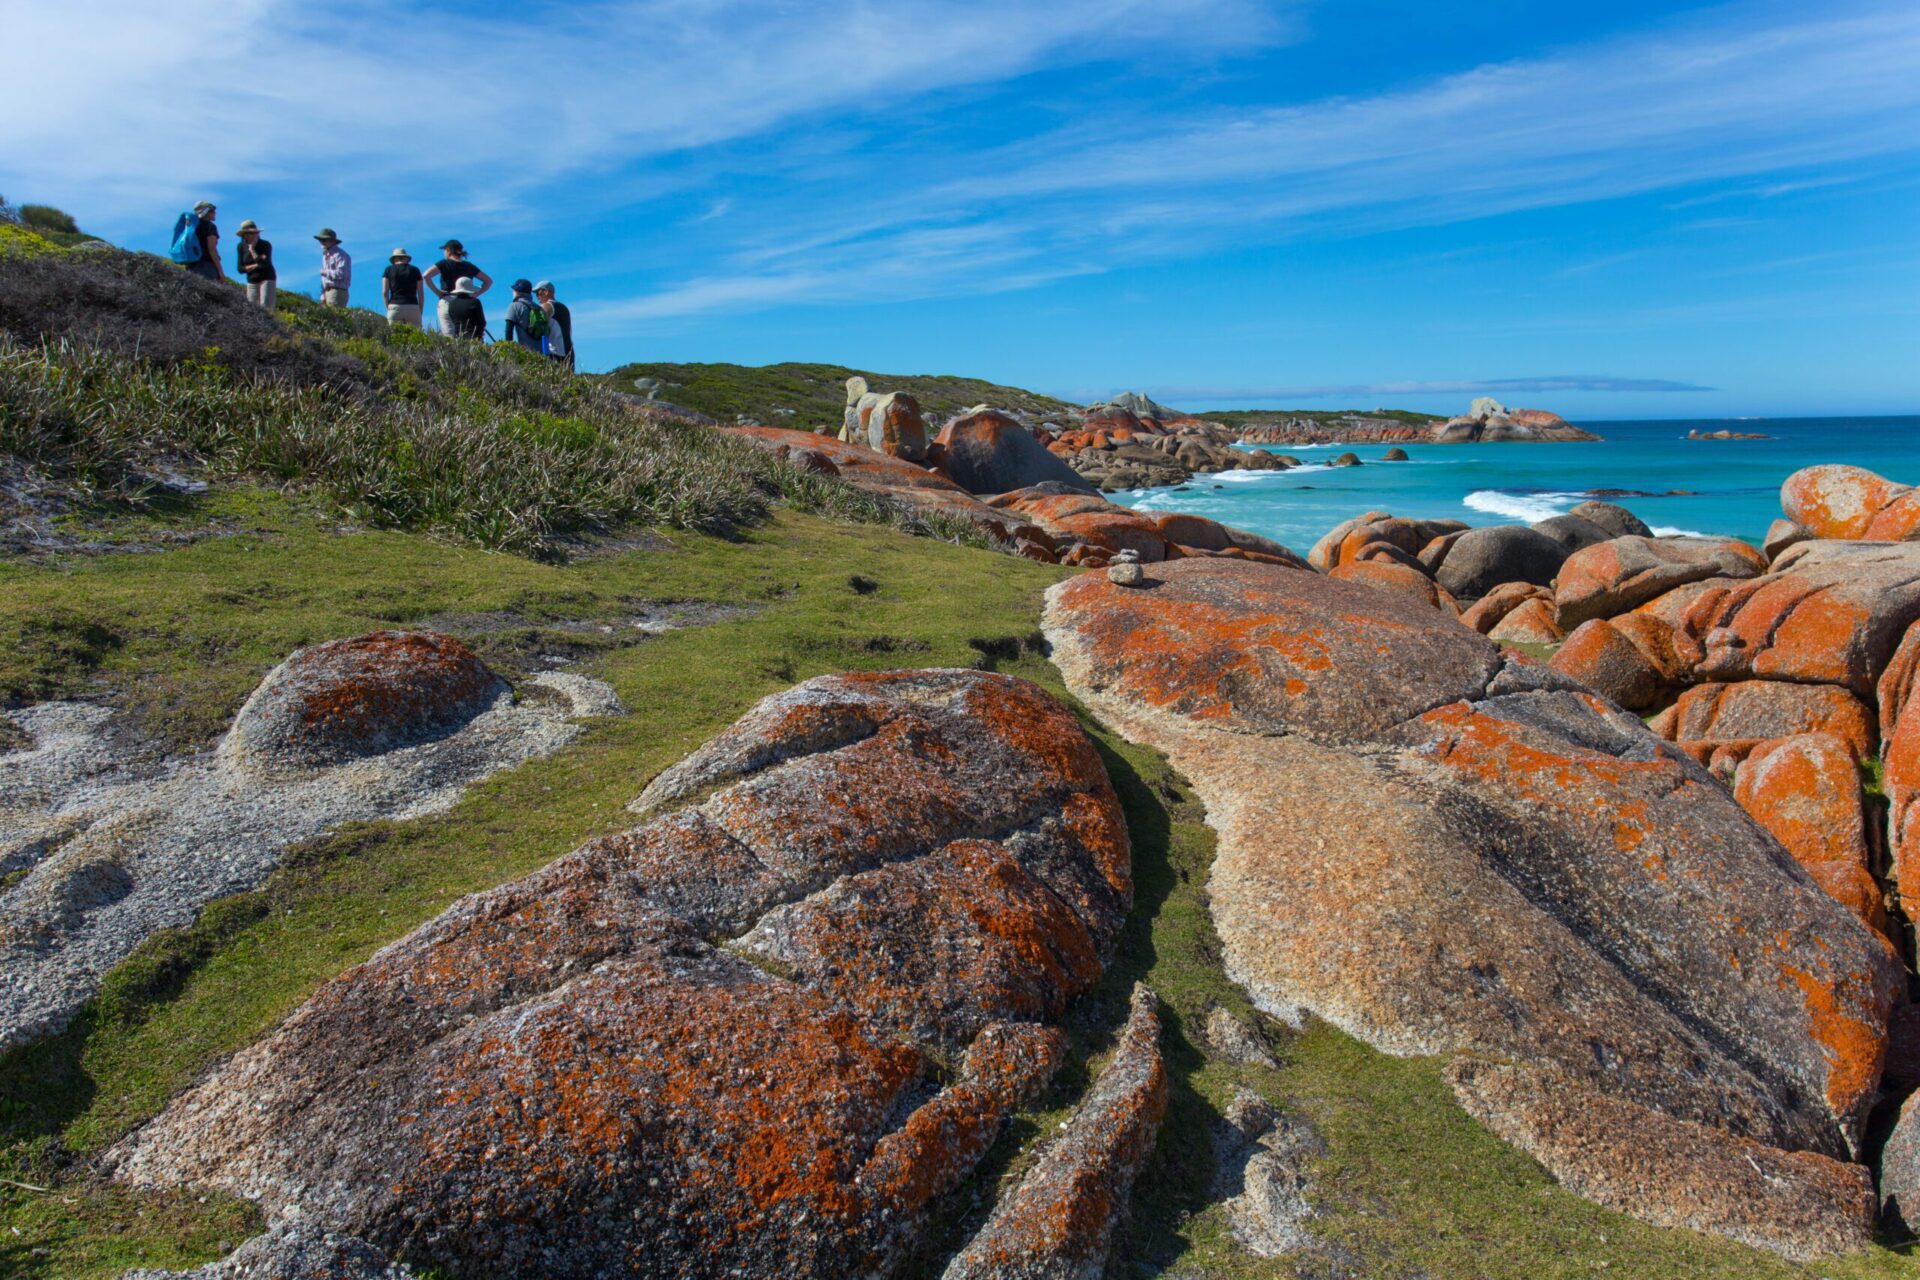 people walking in the distance with lichen covered rocks and beach in the foreground on a hiking and climbing safari